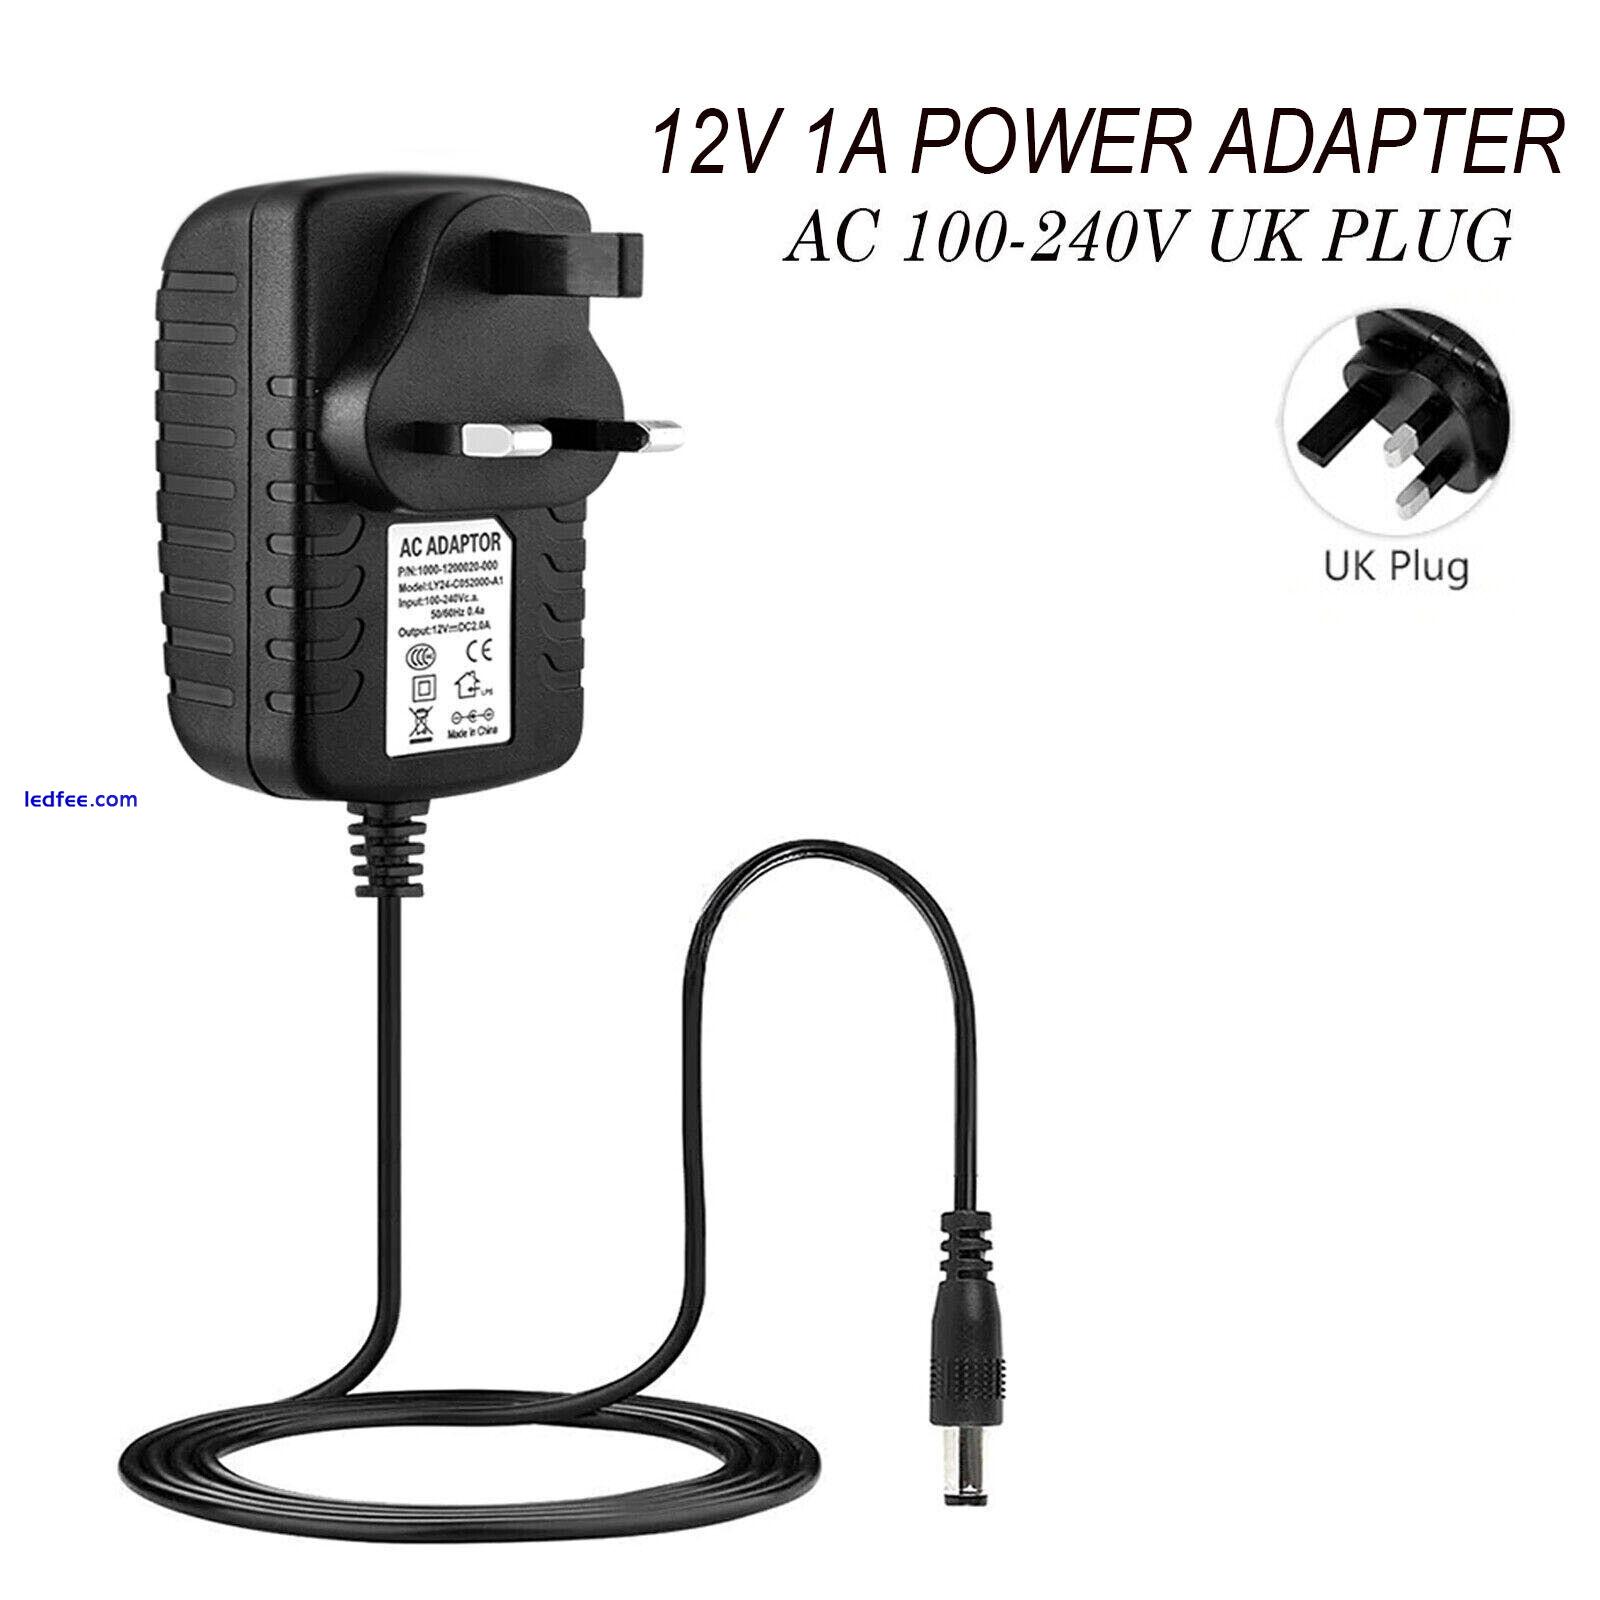 12V 1A-3A Adapter AC/DC UK Power Supply Charger For LED Strip CCTV Camera 0 